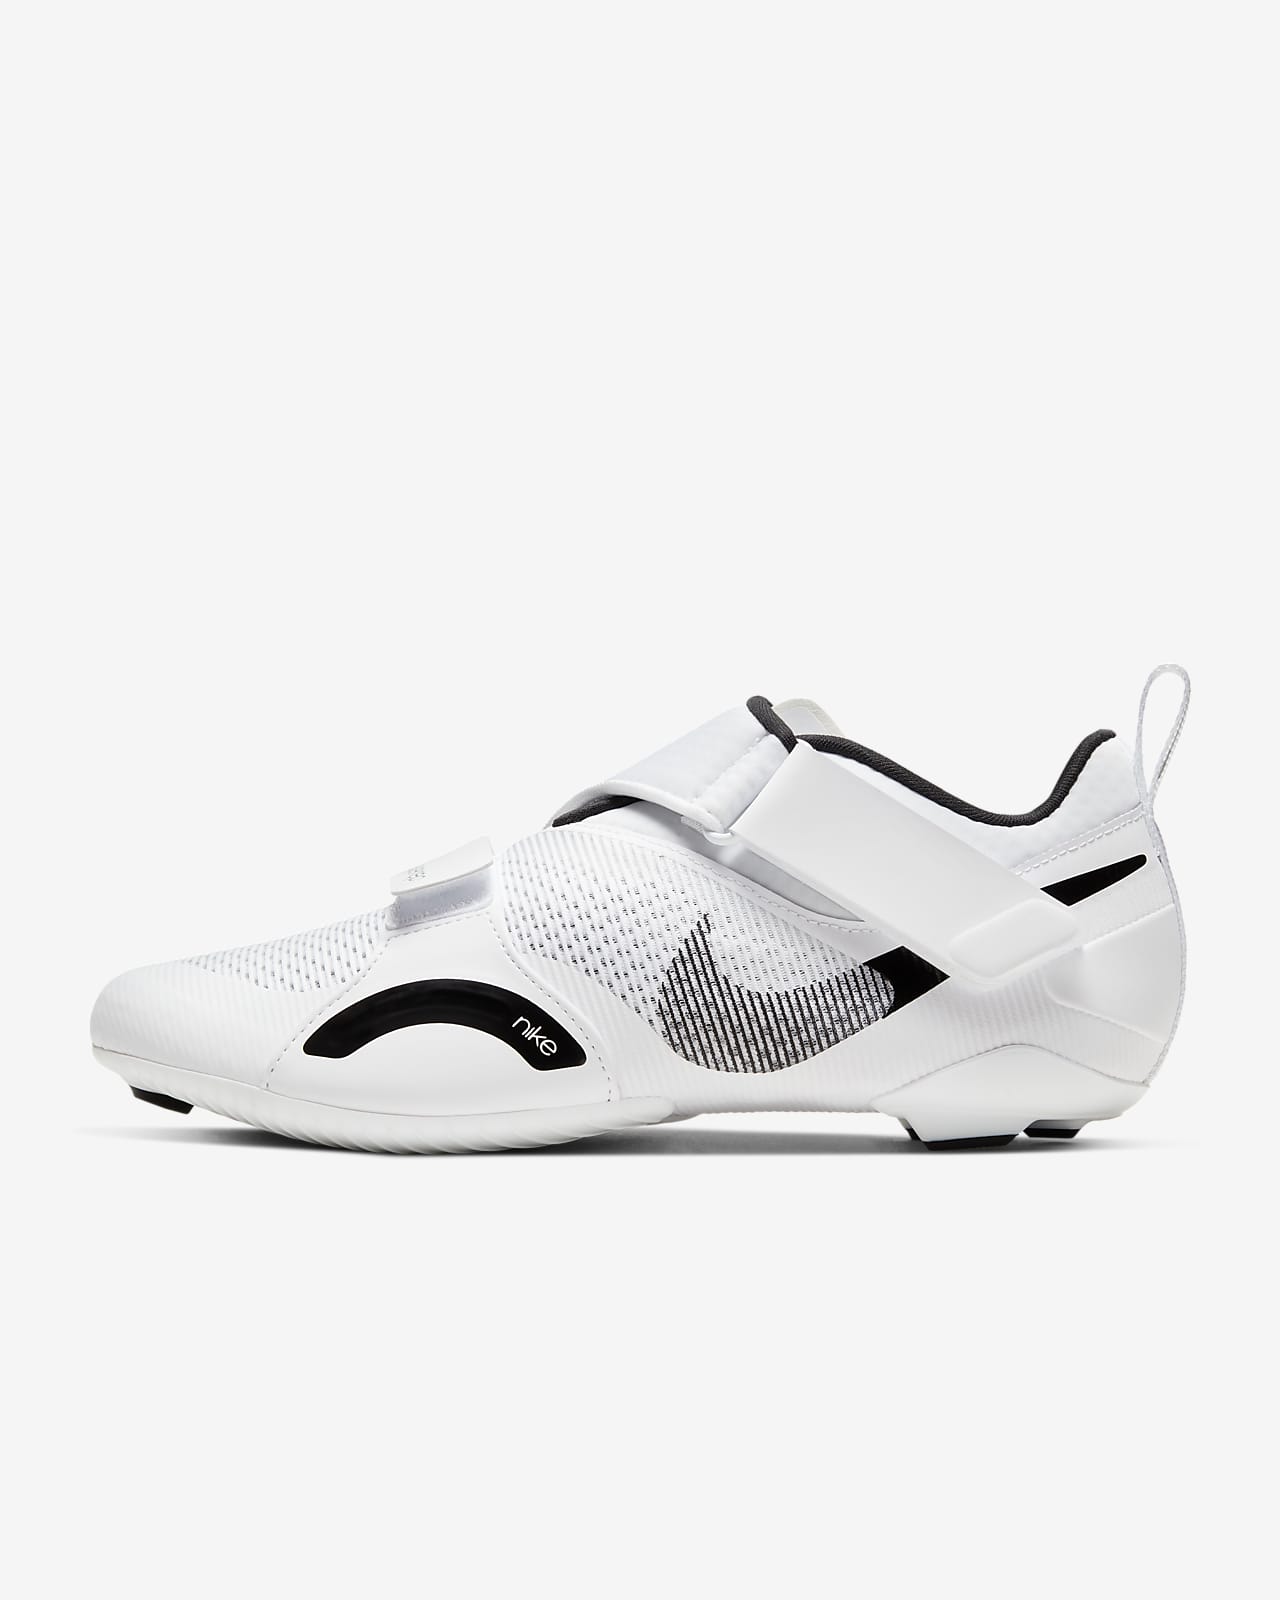 nike indoor soccer shoes 219